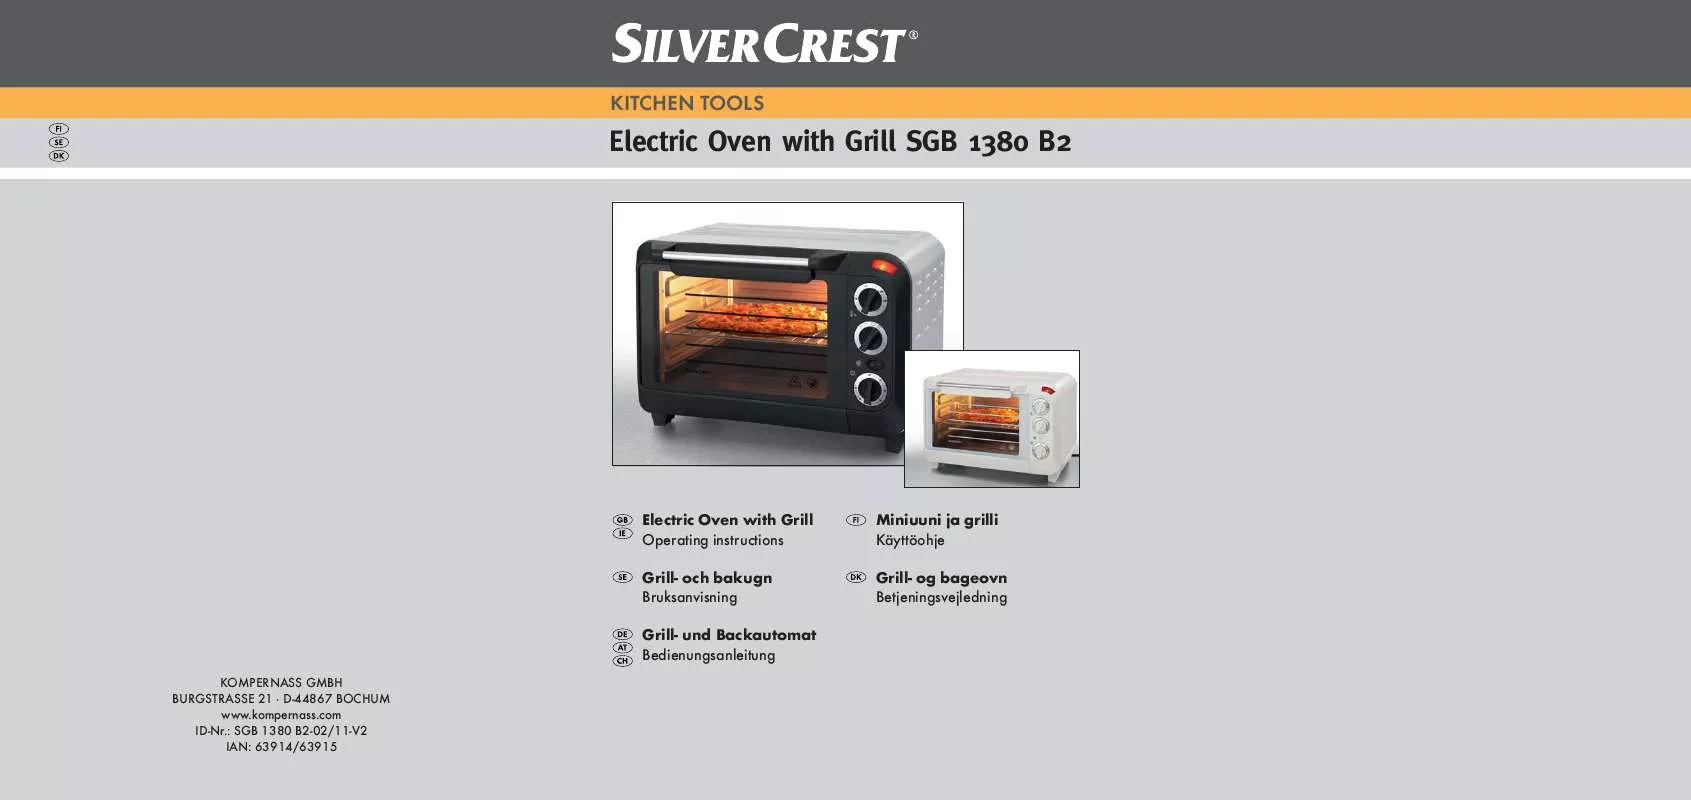 Mode d'emploi SILVERCREST SGB 1380 B2 ELECTRIC OVEN WITH GRILL